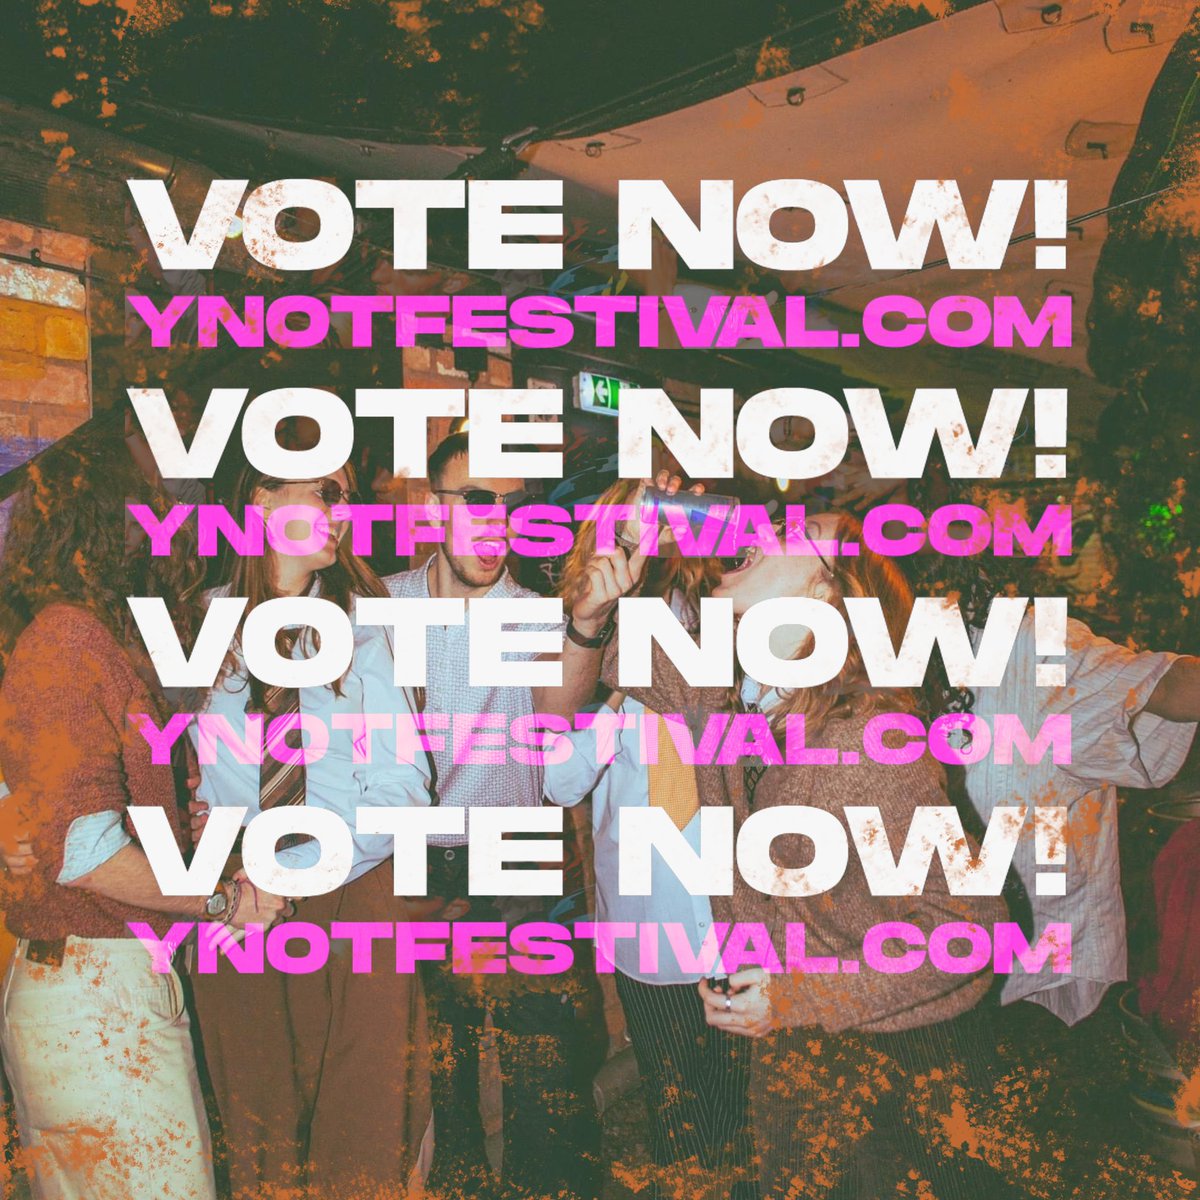 One more day left to vote for us to play @ynotfestival !! Please stick a vote if you have a few seconds spare, let’s get this one over the line💛 Vote here: bit.ly/ynotbandappvote #ynotfestival #bandapp